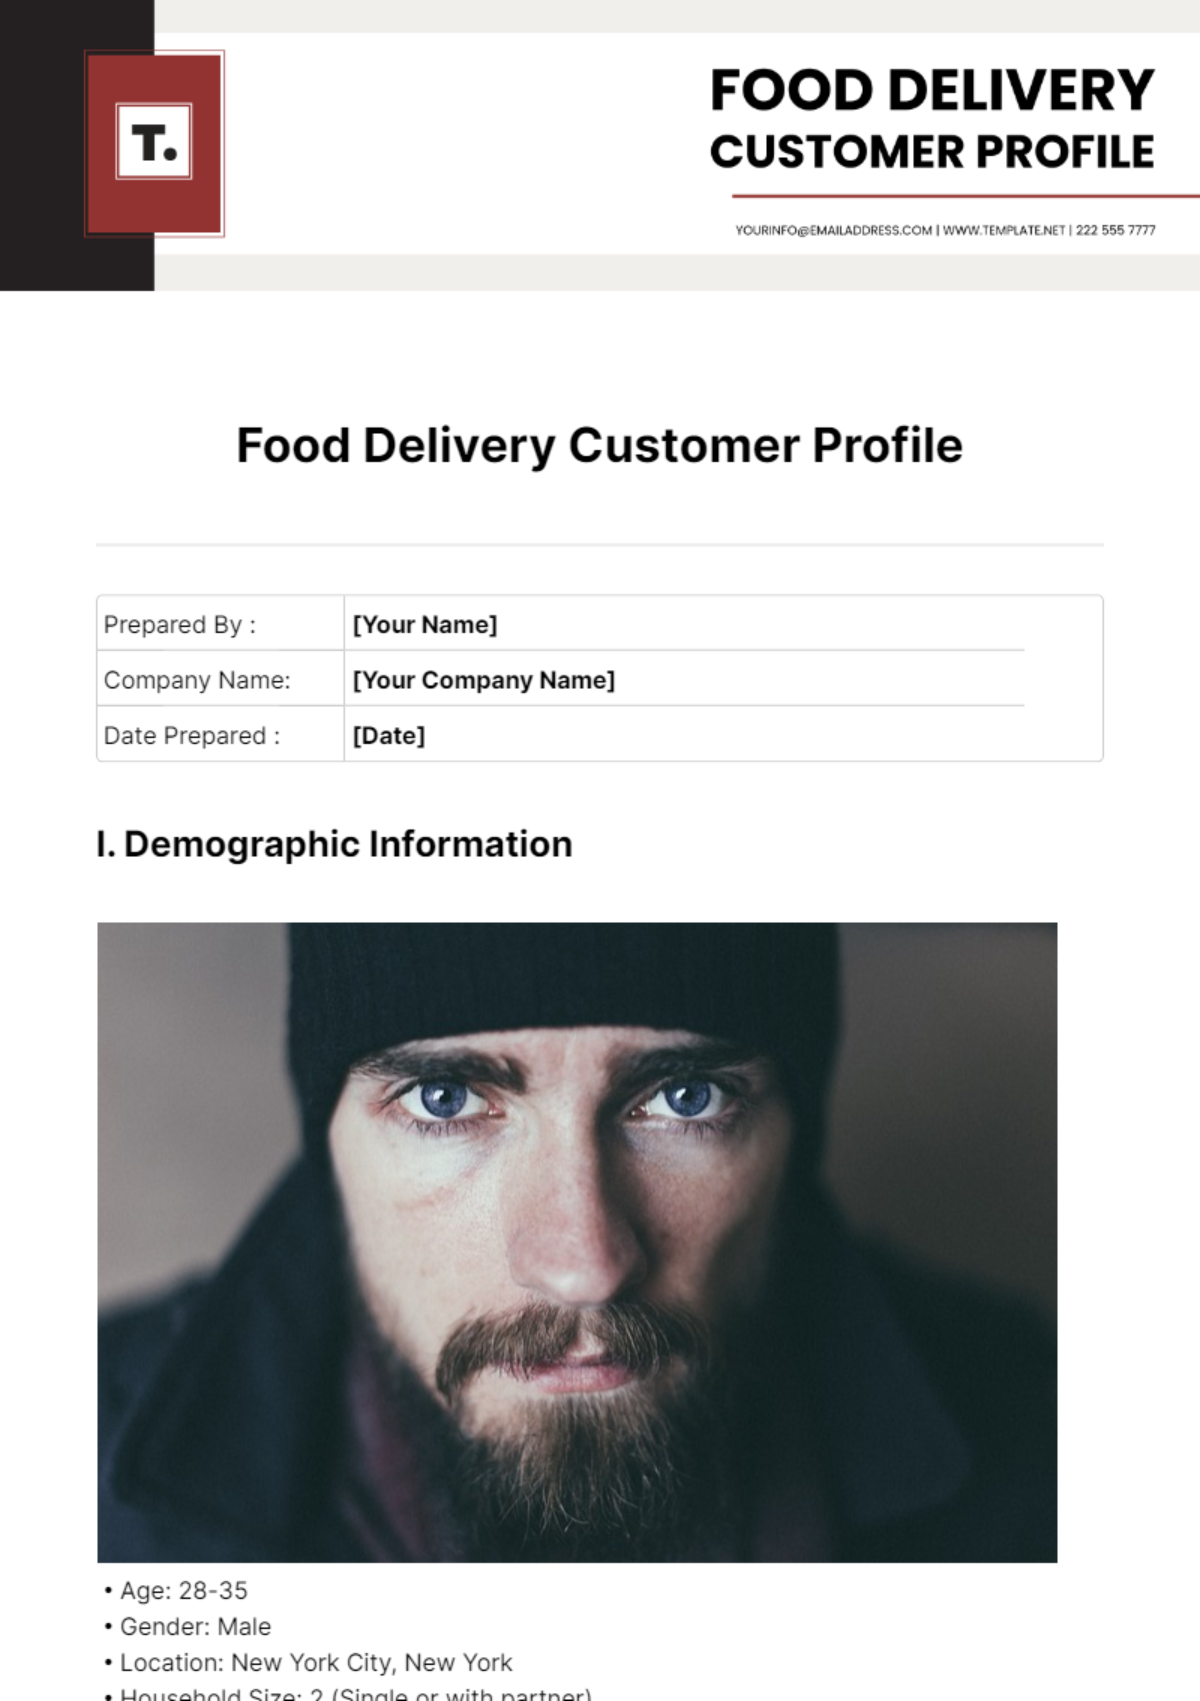 Food Delivery Customer Profile Template